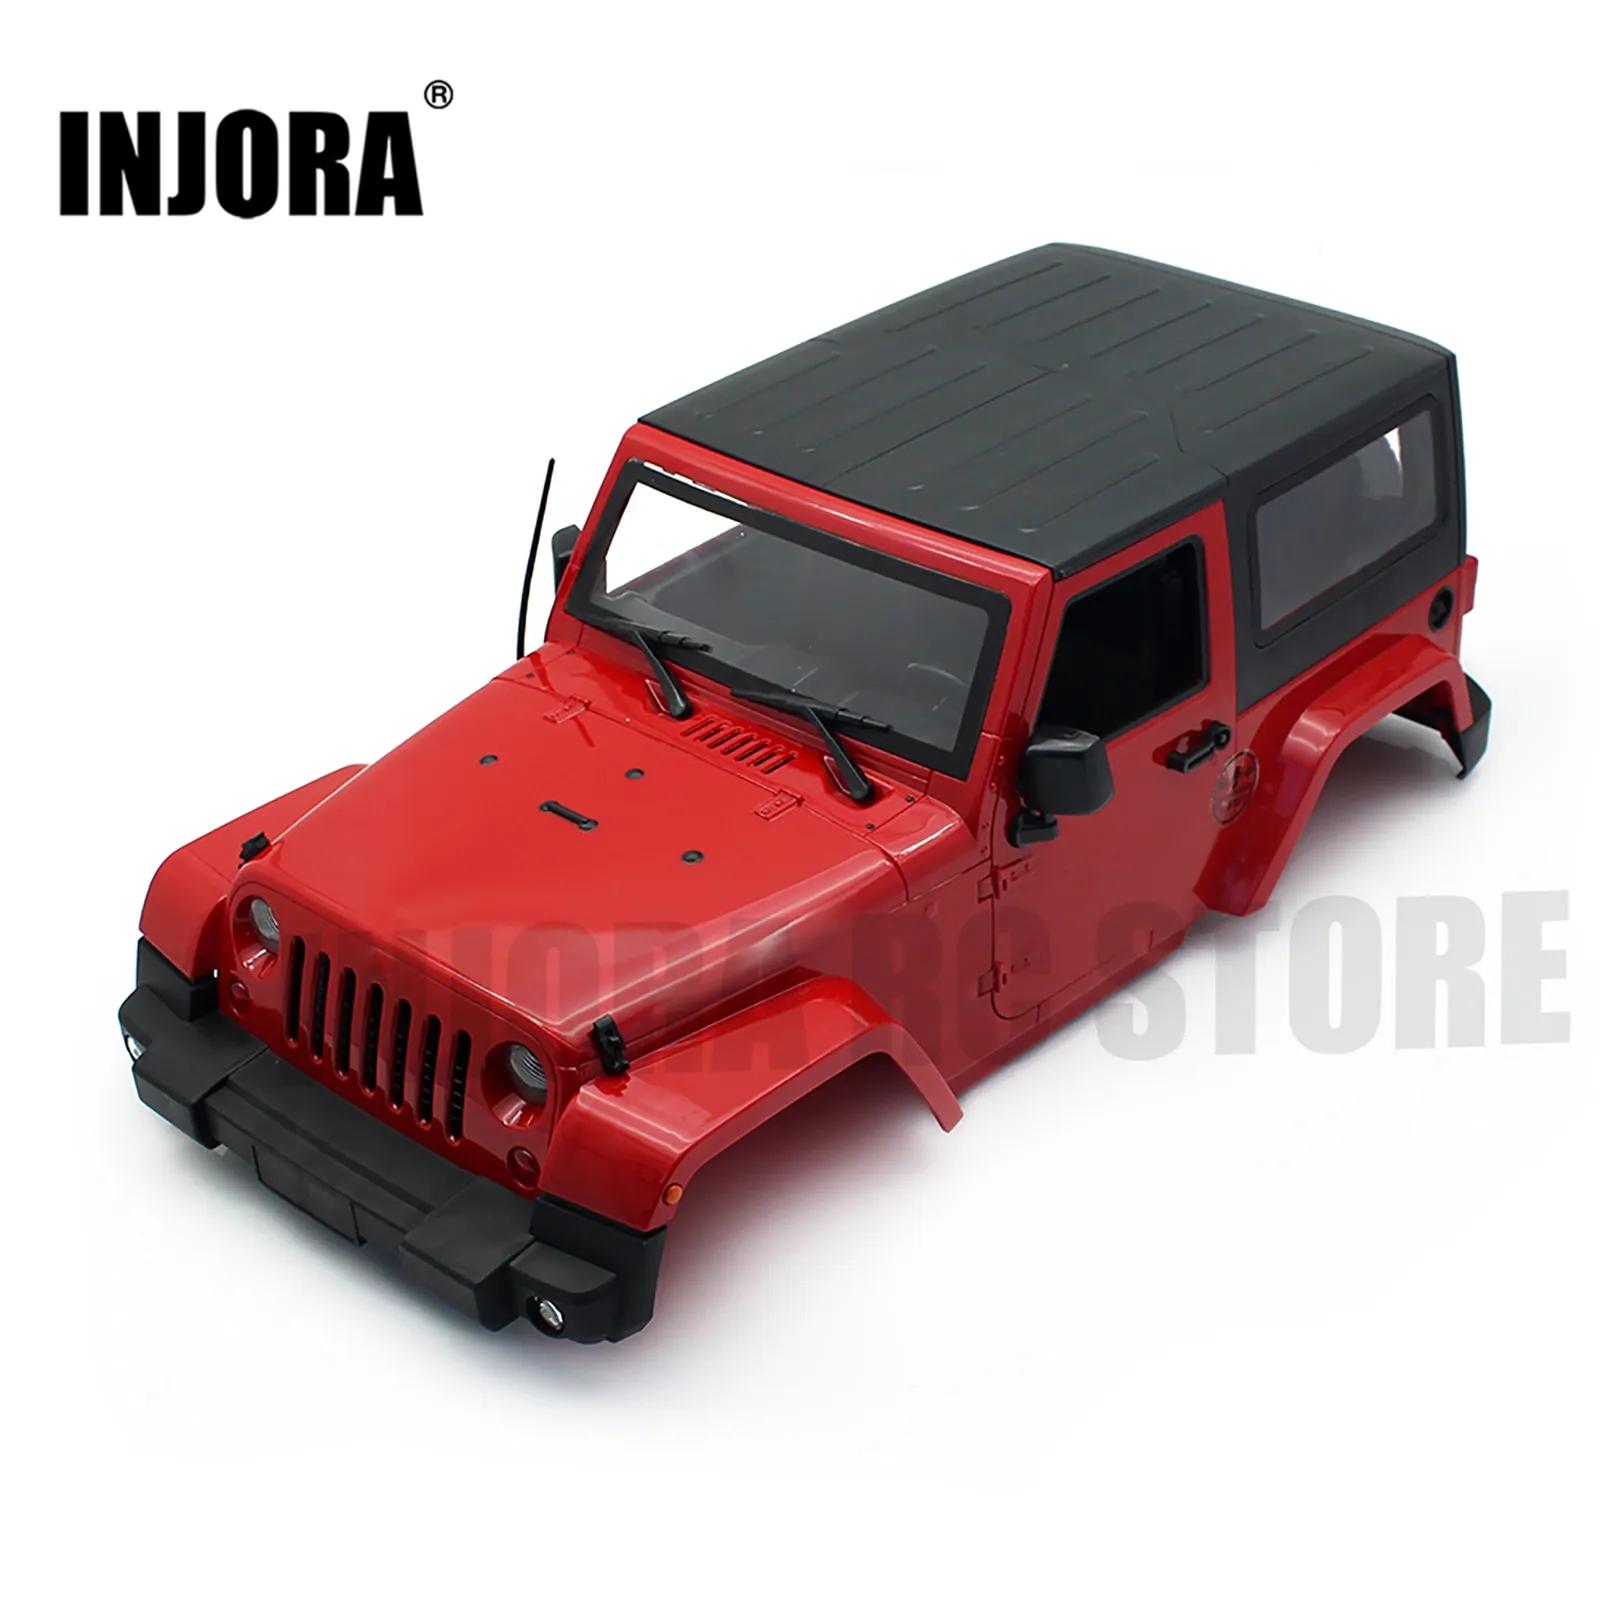 Injora Jeep Body: Customization and Durability Highlighted